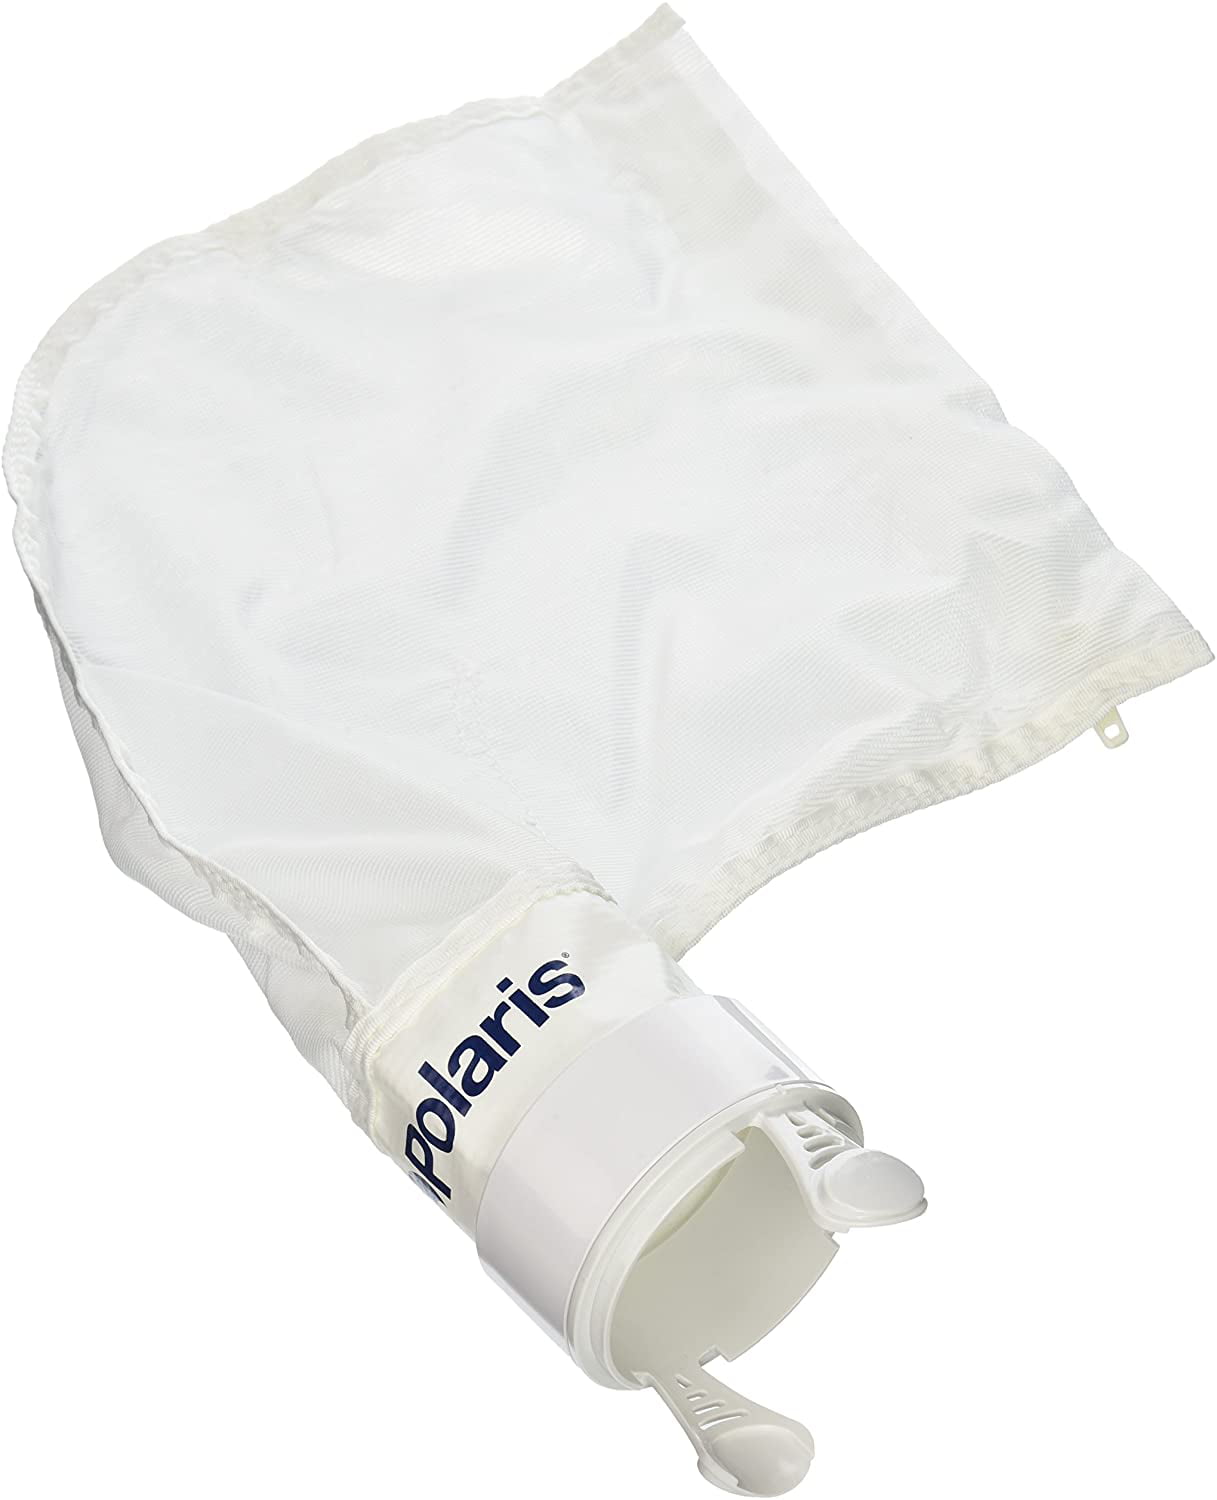 K13 All-Purpose Zippered Bag for 280 Pool Cleaner Polaris 